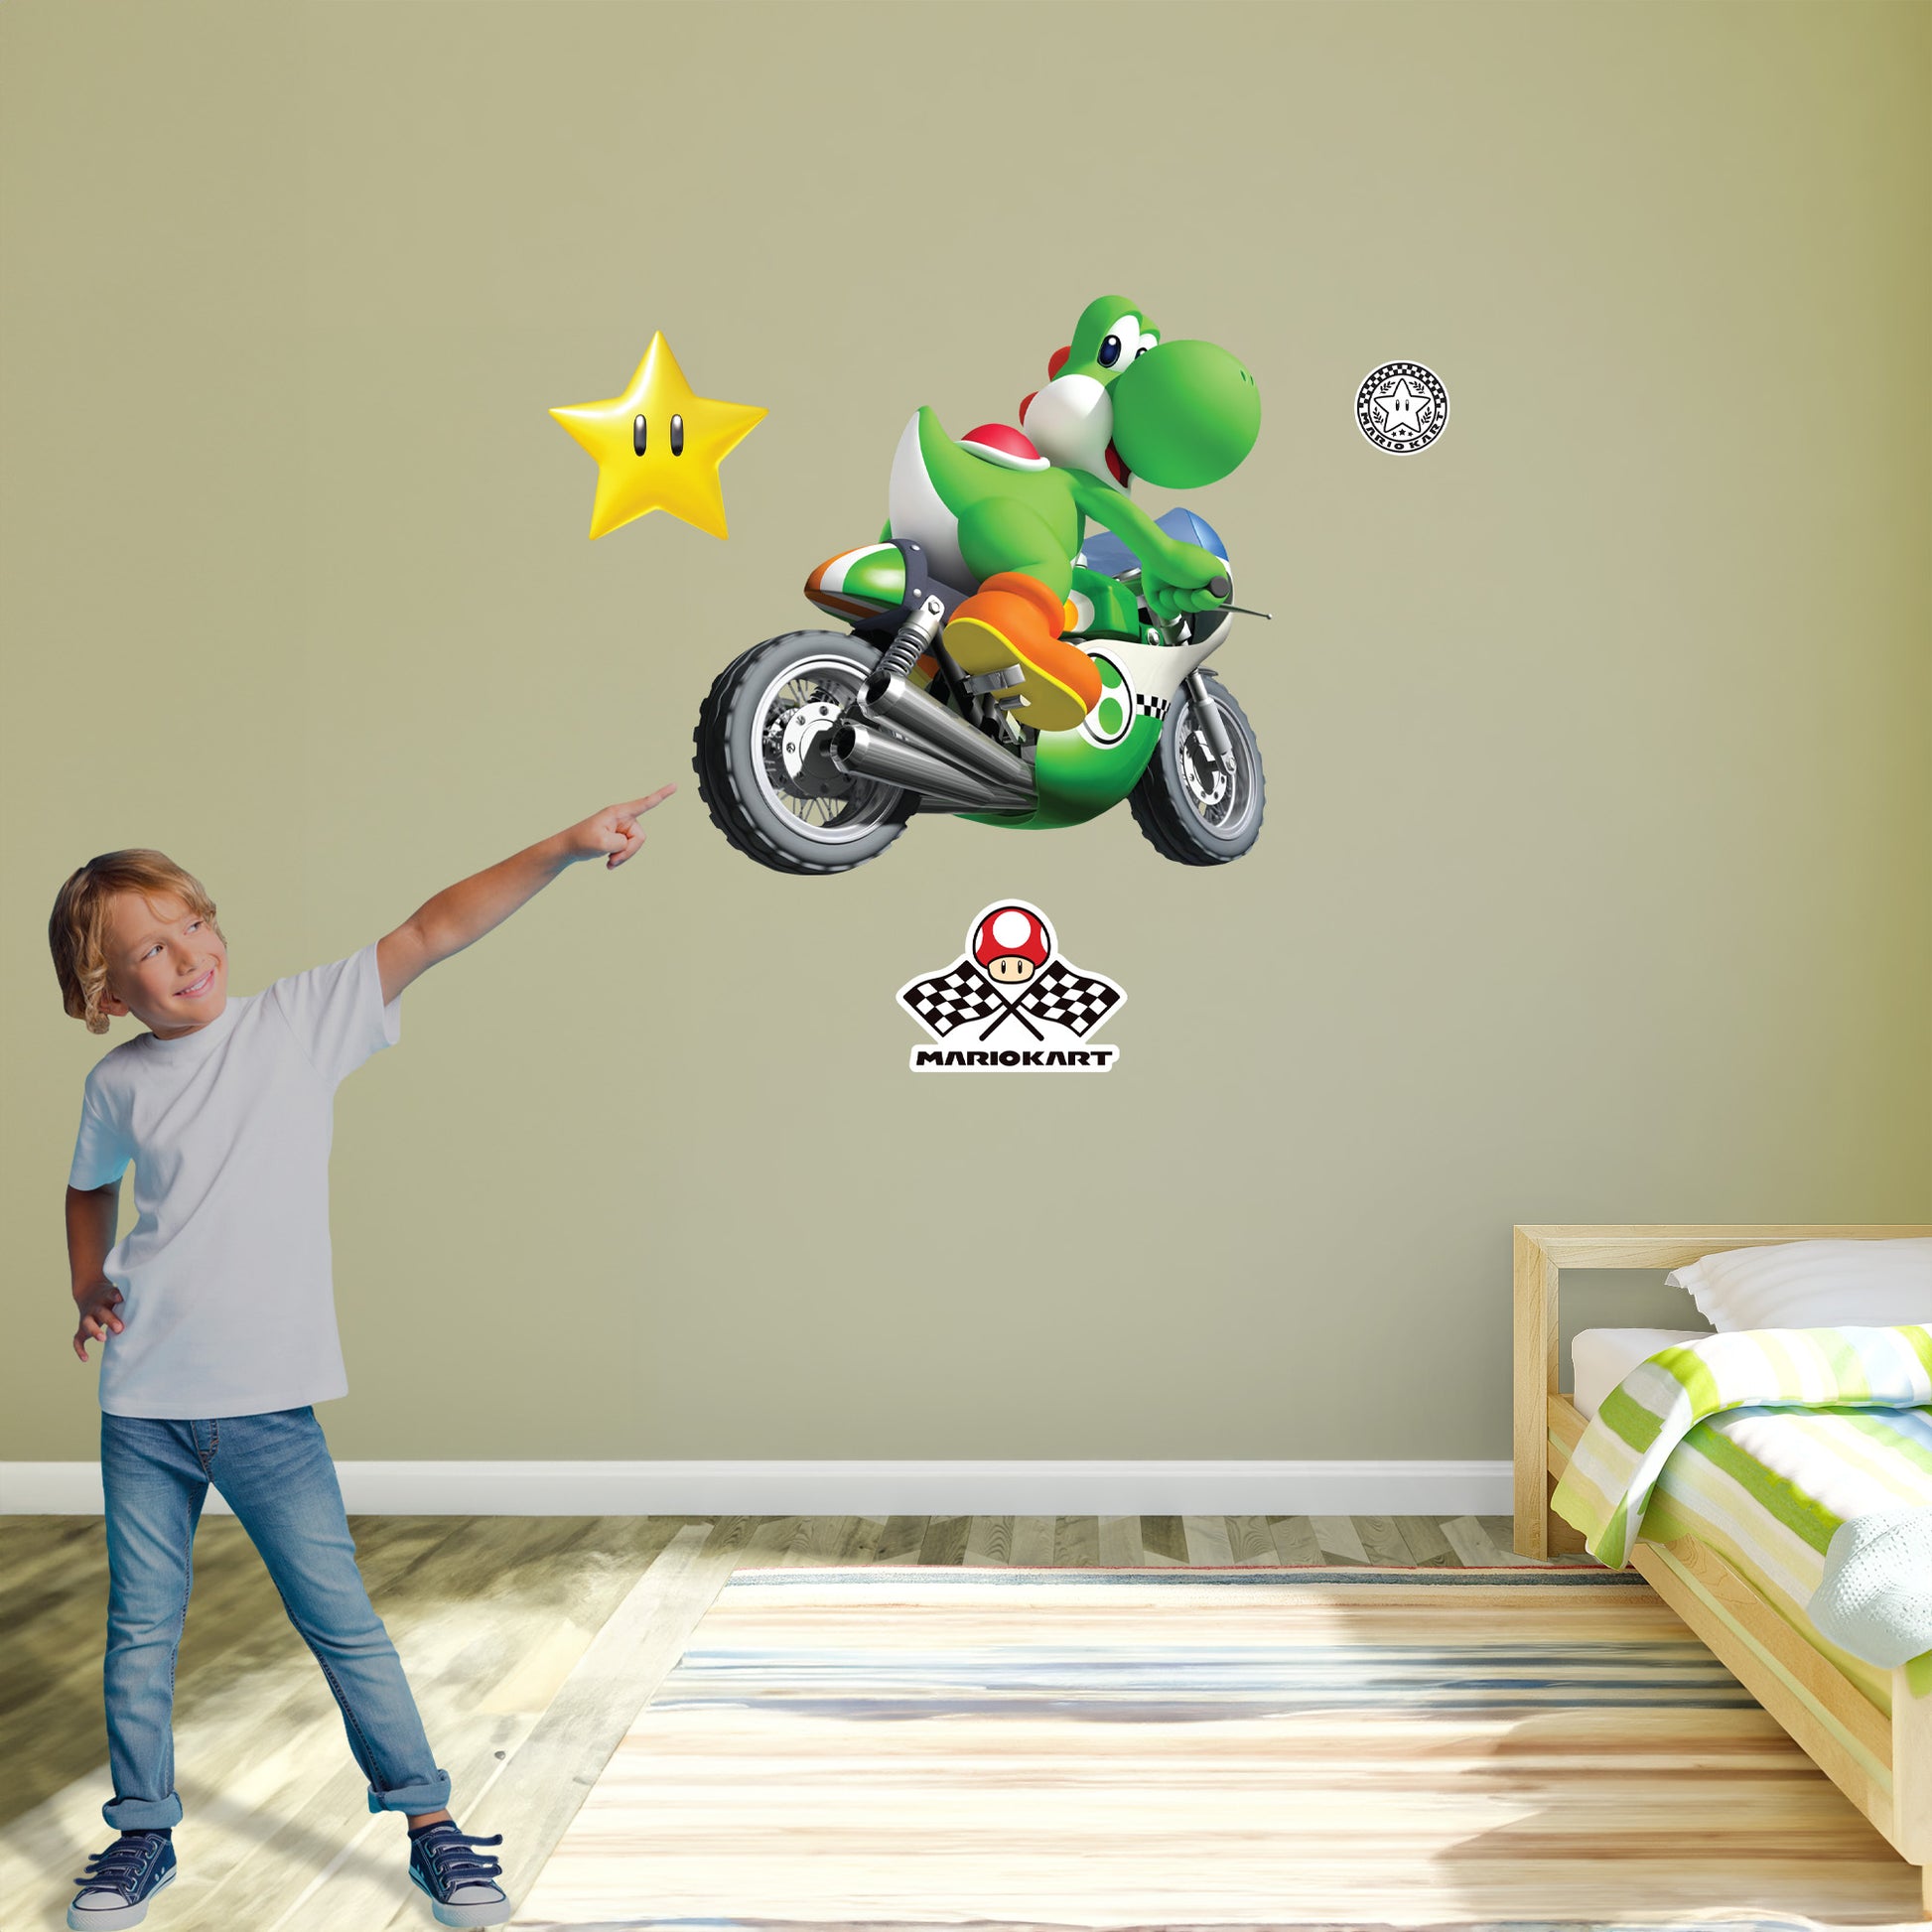 Giant Character +3 Decals  (40"W x 40"H) 